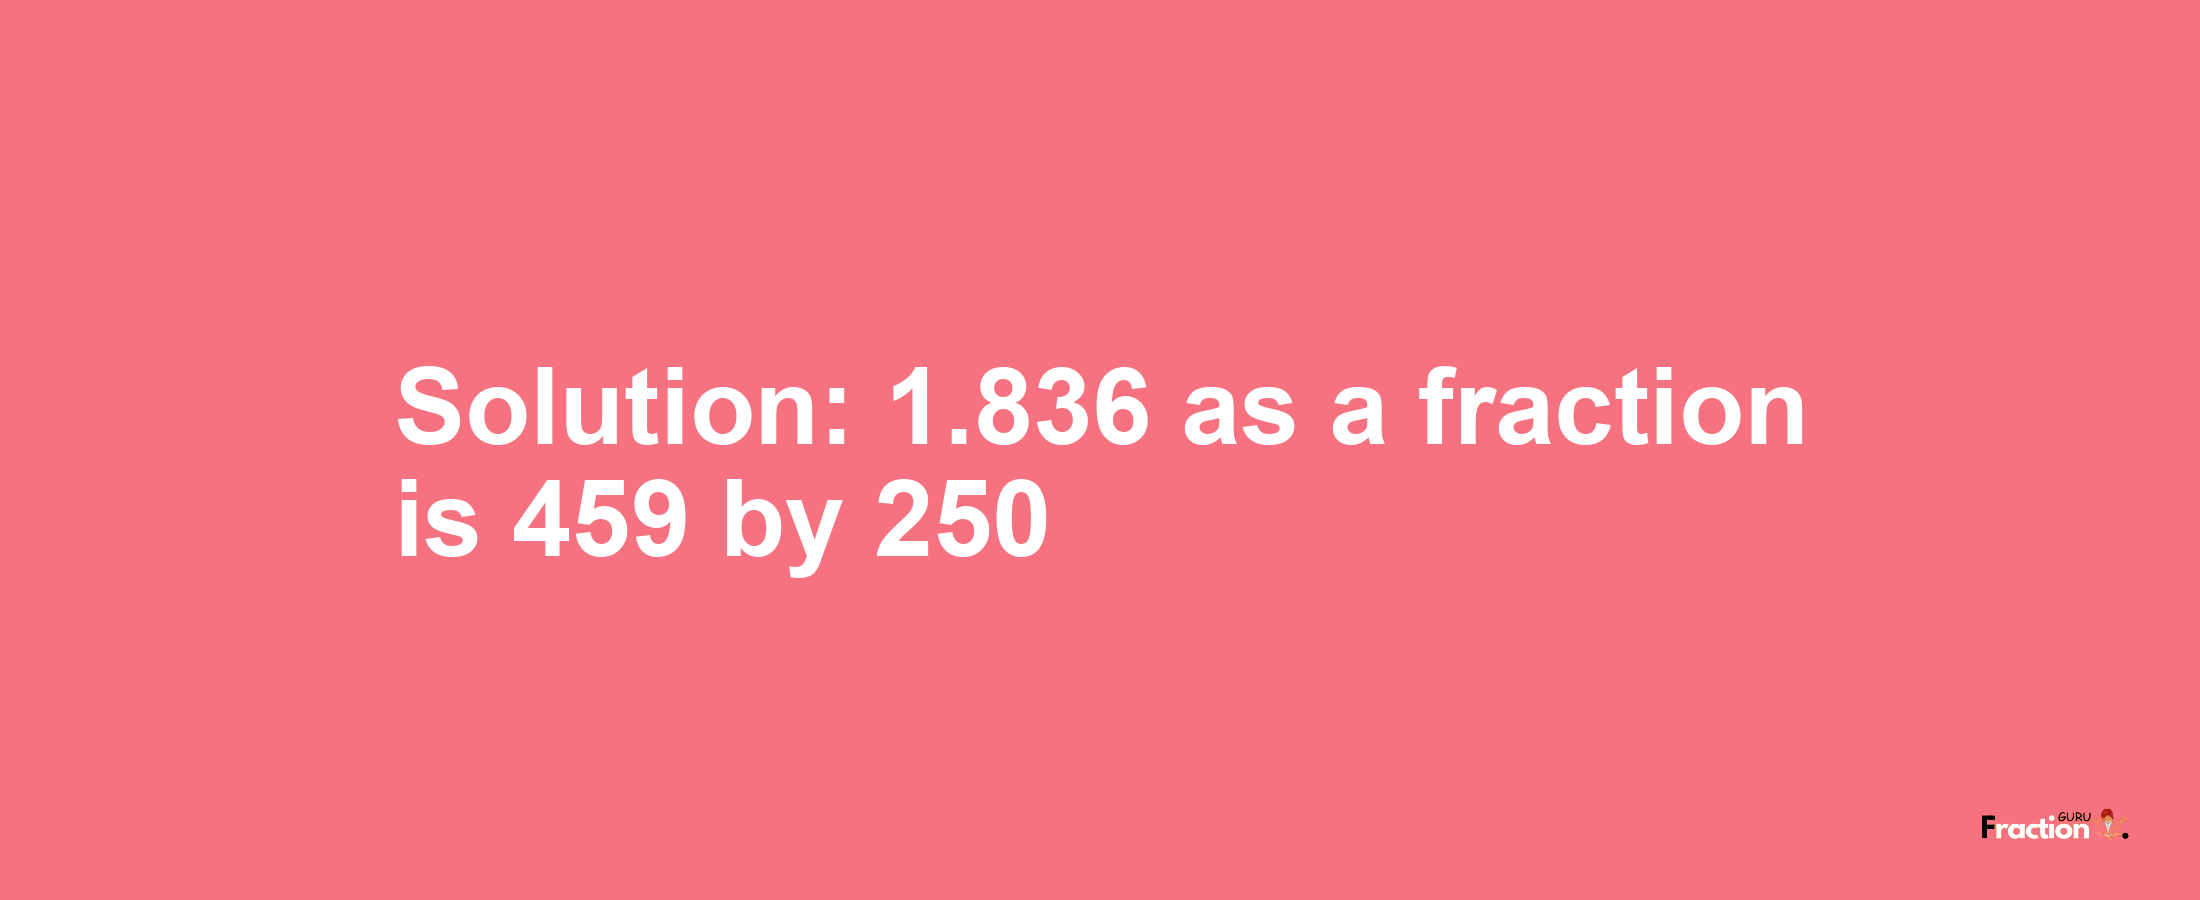 Solution:1.836 as a fraction is 459/250